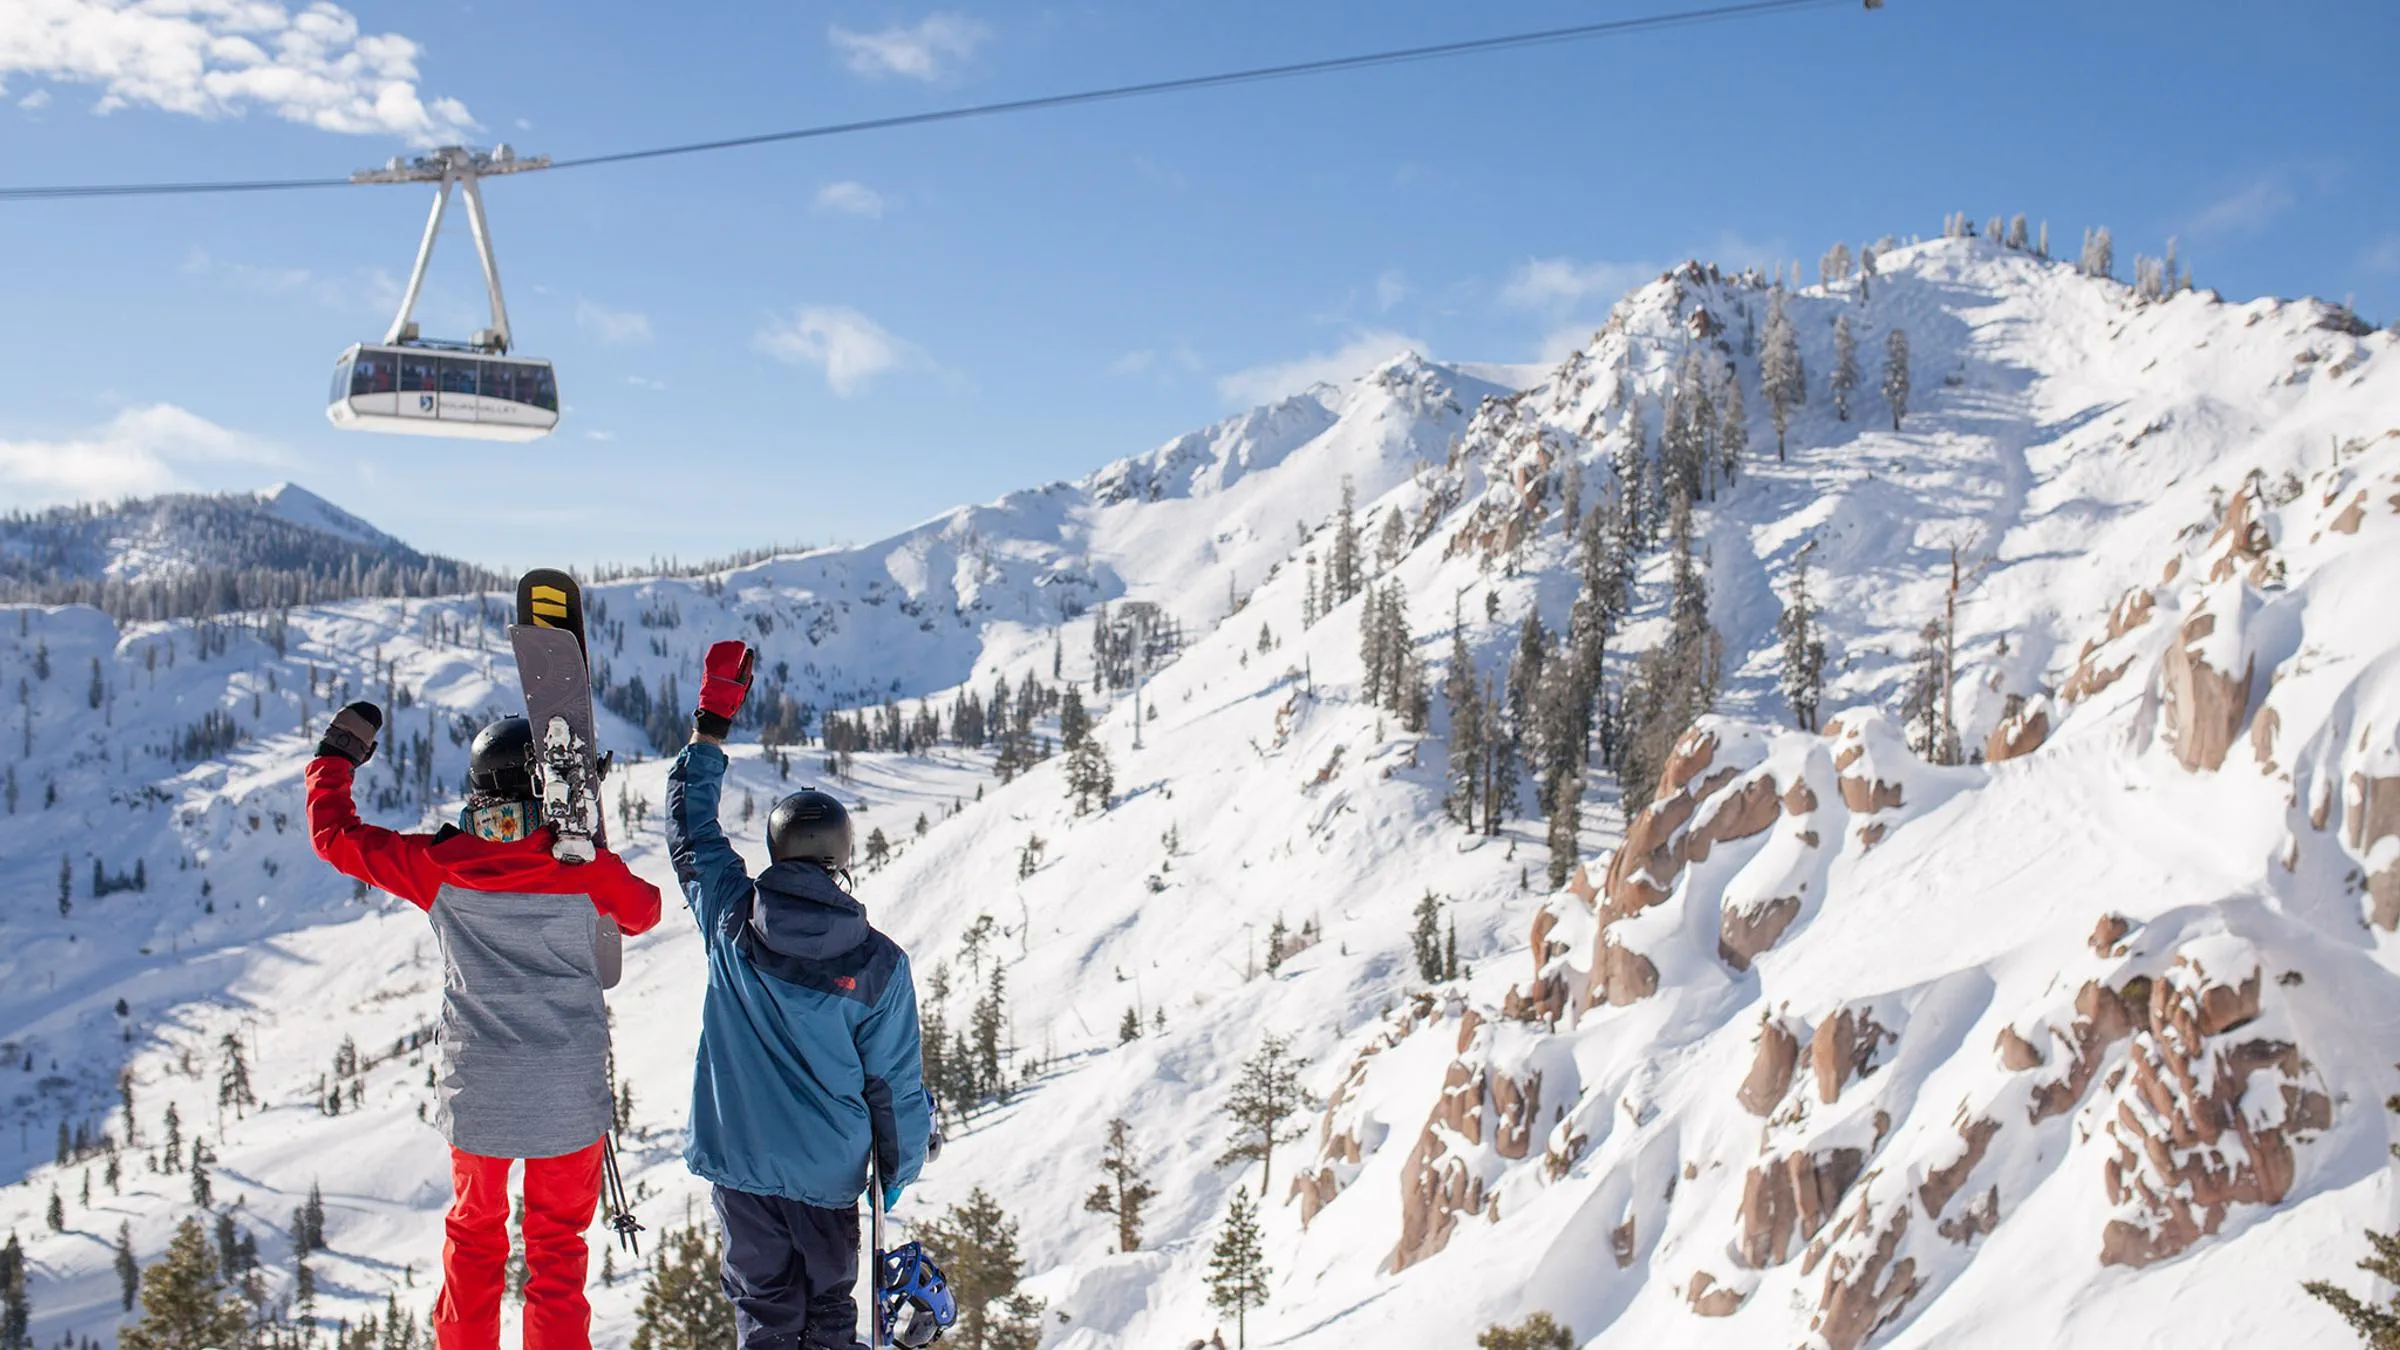 Aspirational lifestyles of a skier and a snowboarder waving to aerial Tram at Squaw Valley